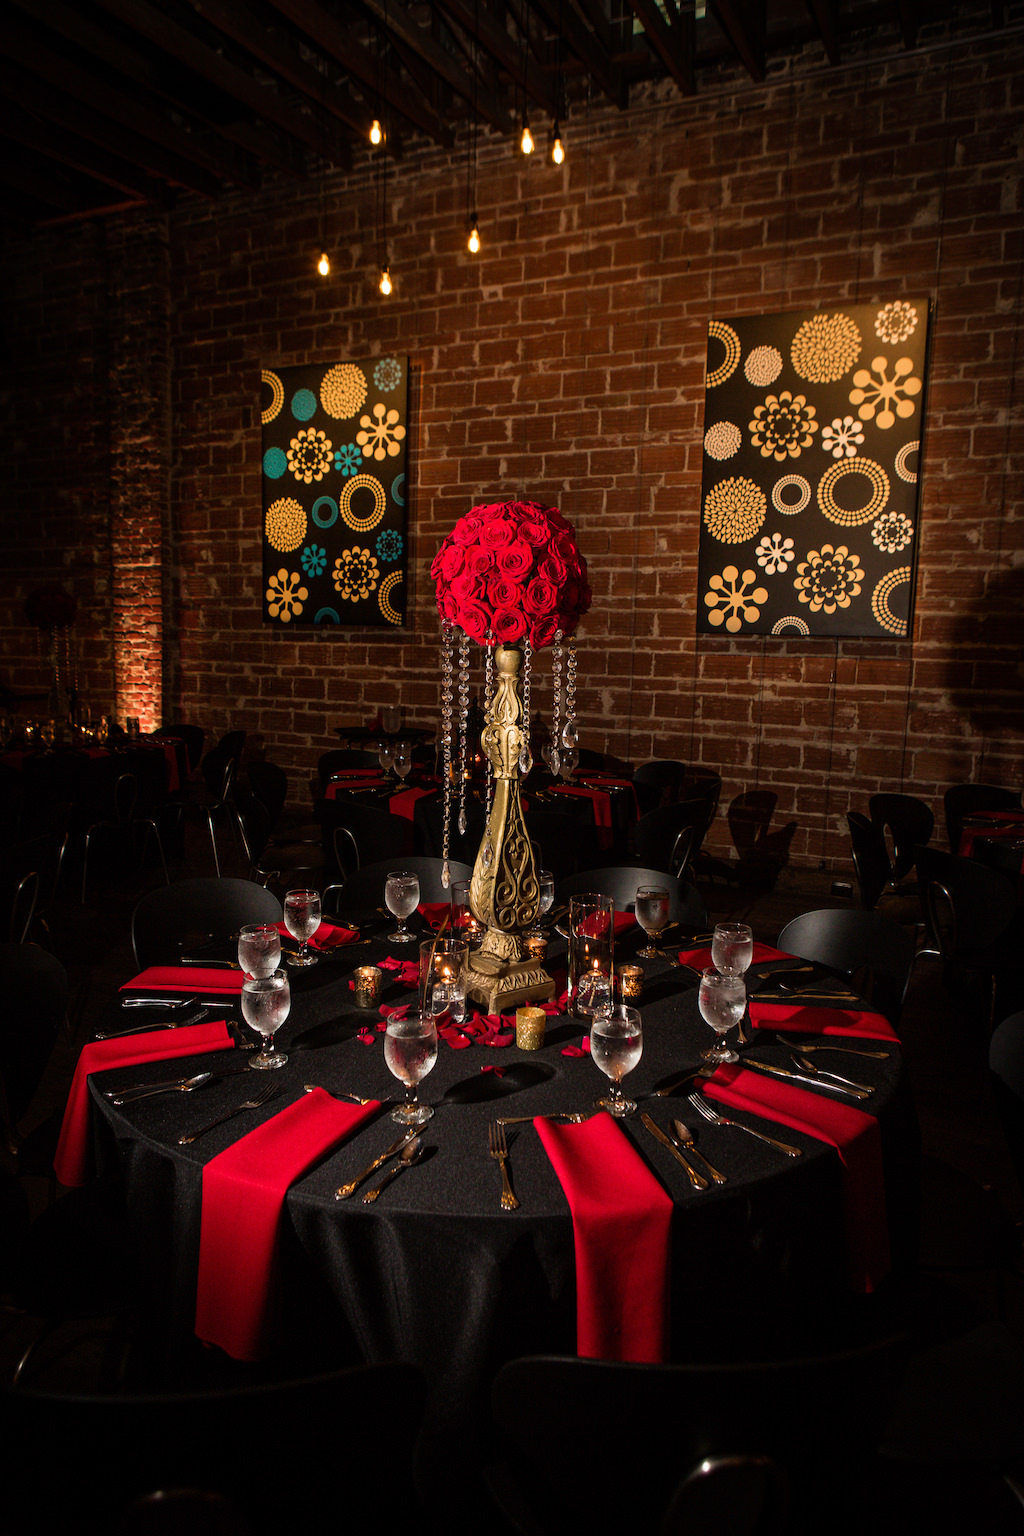 Great Gatsby Inspired Indoor Wedding Reception Decor Centerpiece at St. Pete Venue, Round Table with Black Satin Linens, Red Napkins, Red Roses Bouquets on Gold Vintage Pedestals with Hanging Crystals | Downtown St. Pete Wedding Venue NOVA 535